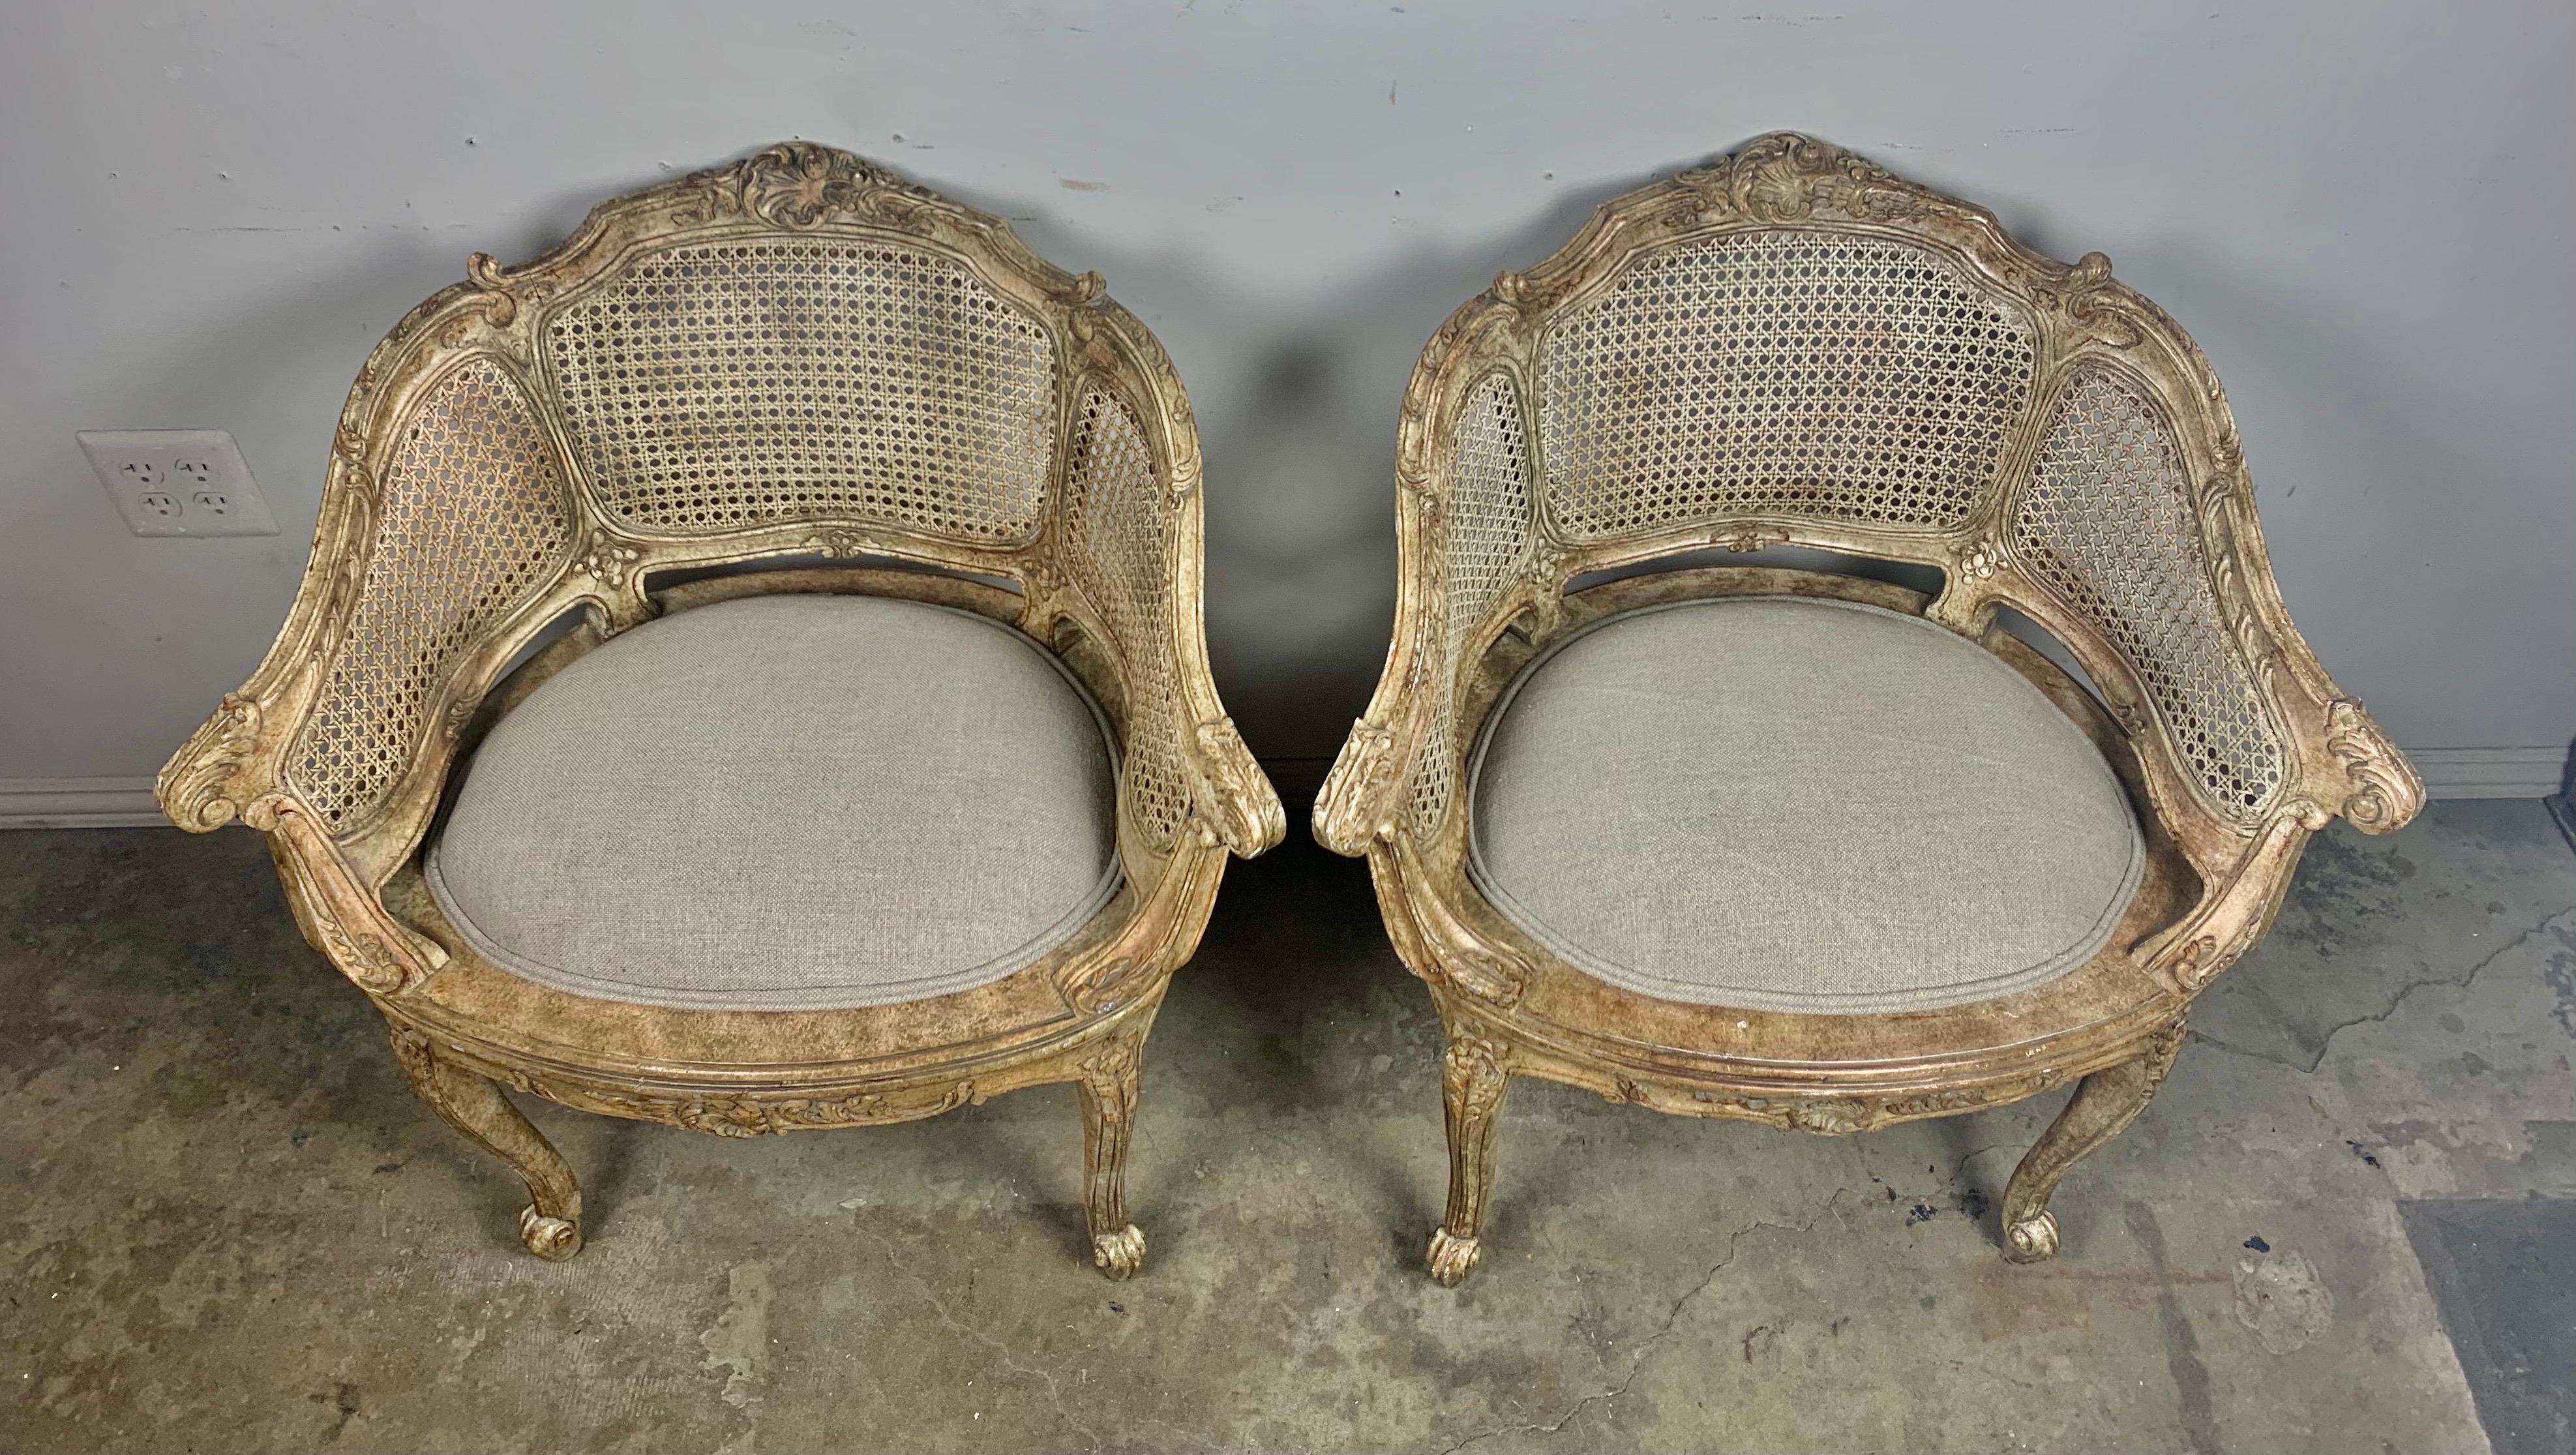 Pair of charming French Louis XV style cane armchairs that stand on four cabriole legs. This pair would be perfect in a small sitting area or as vanity chairs in your master bath. The chairs are newly upholstered in Belgium linen and ready to